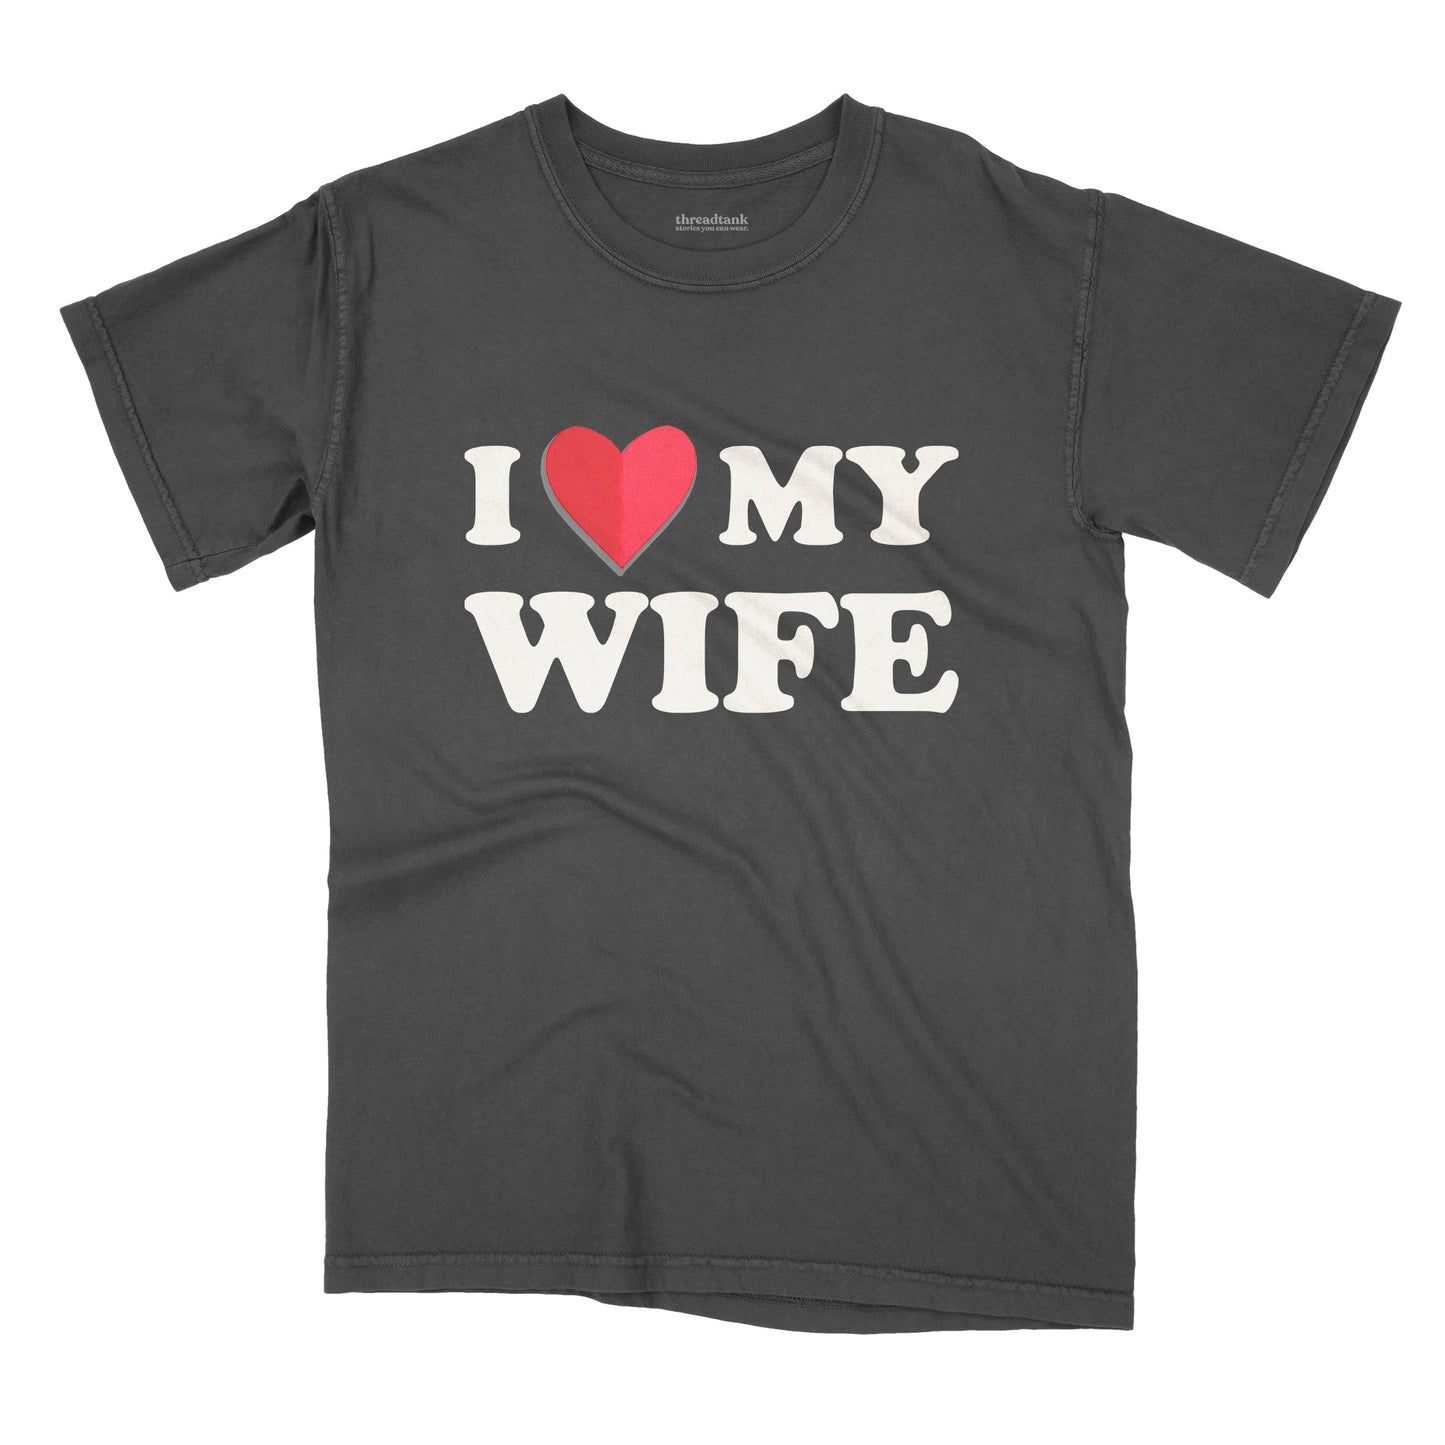 I Heart My Wife Garment-Dyed Tee - Stories You Can Wear